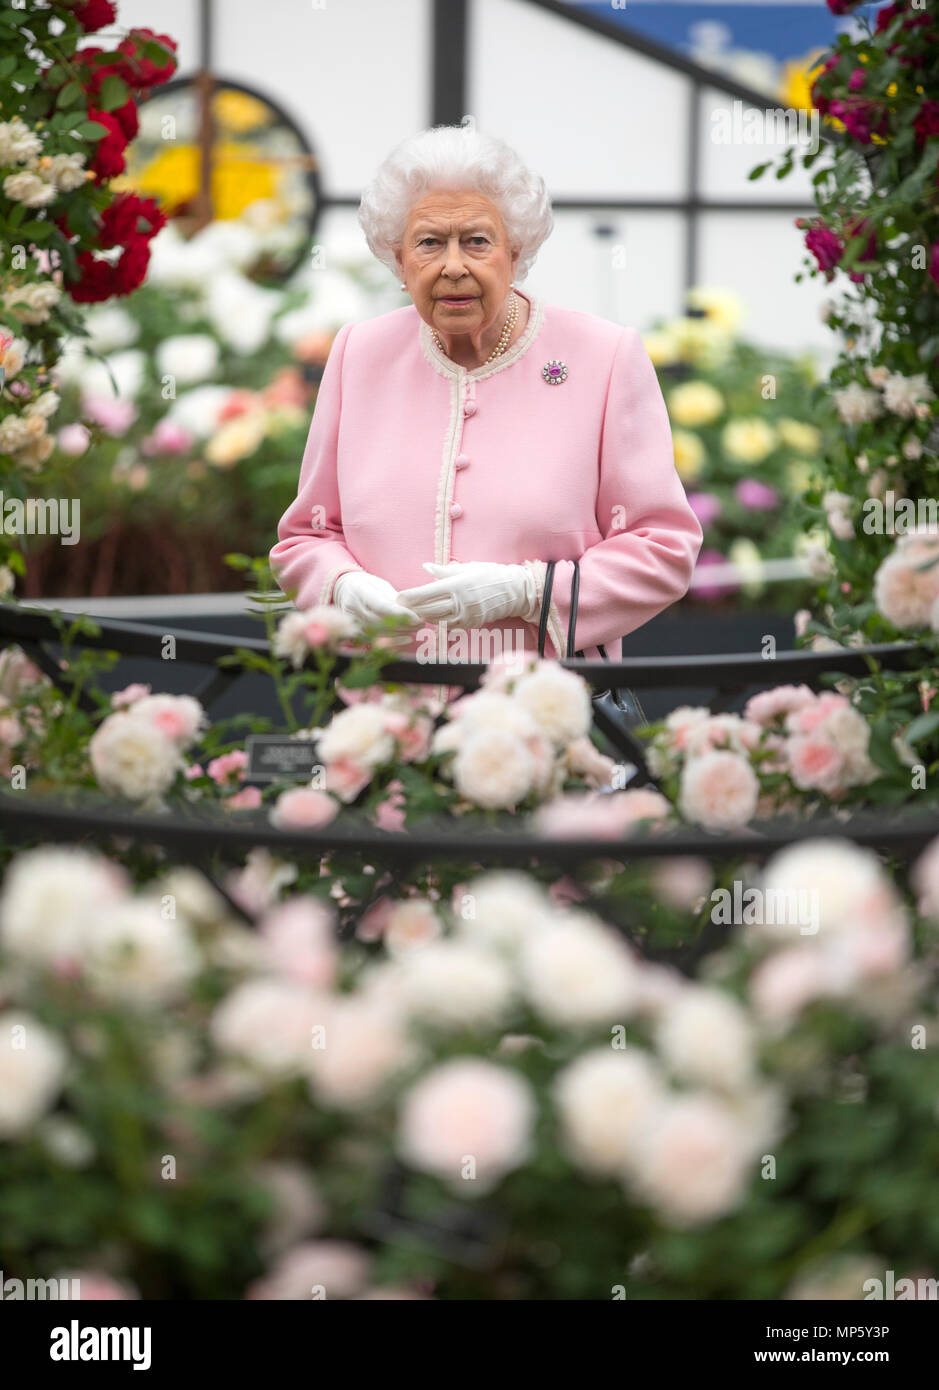 Queen Elizabeth II looks at a display of roses on the Peter Beale roses display stand during her visit to this year's RHS Chelsea Flower Show at the Royal Hospital Chelsea, London. Stock Photo